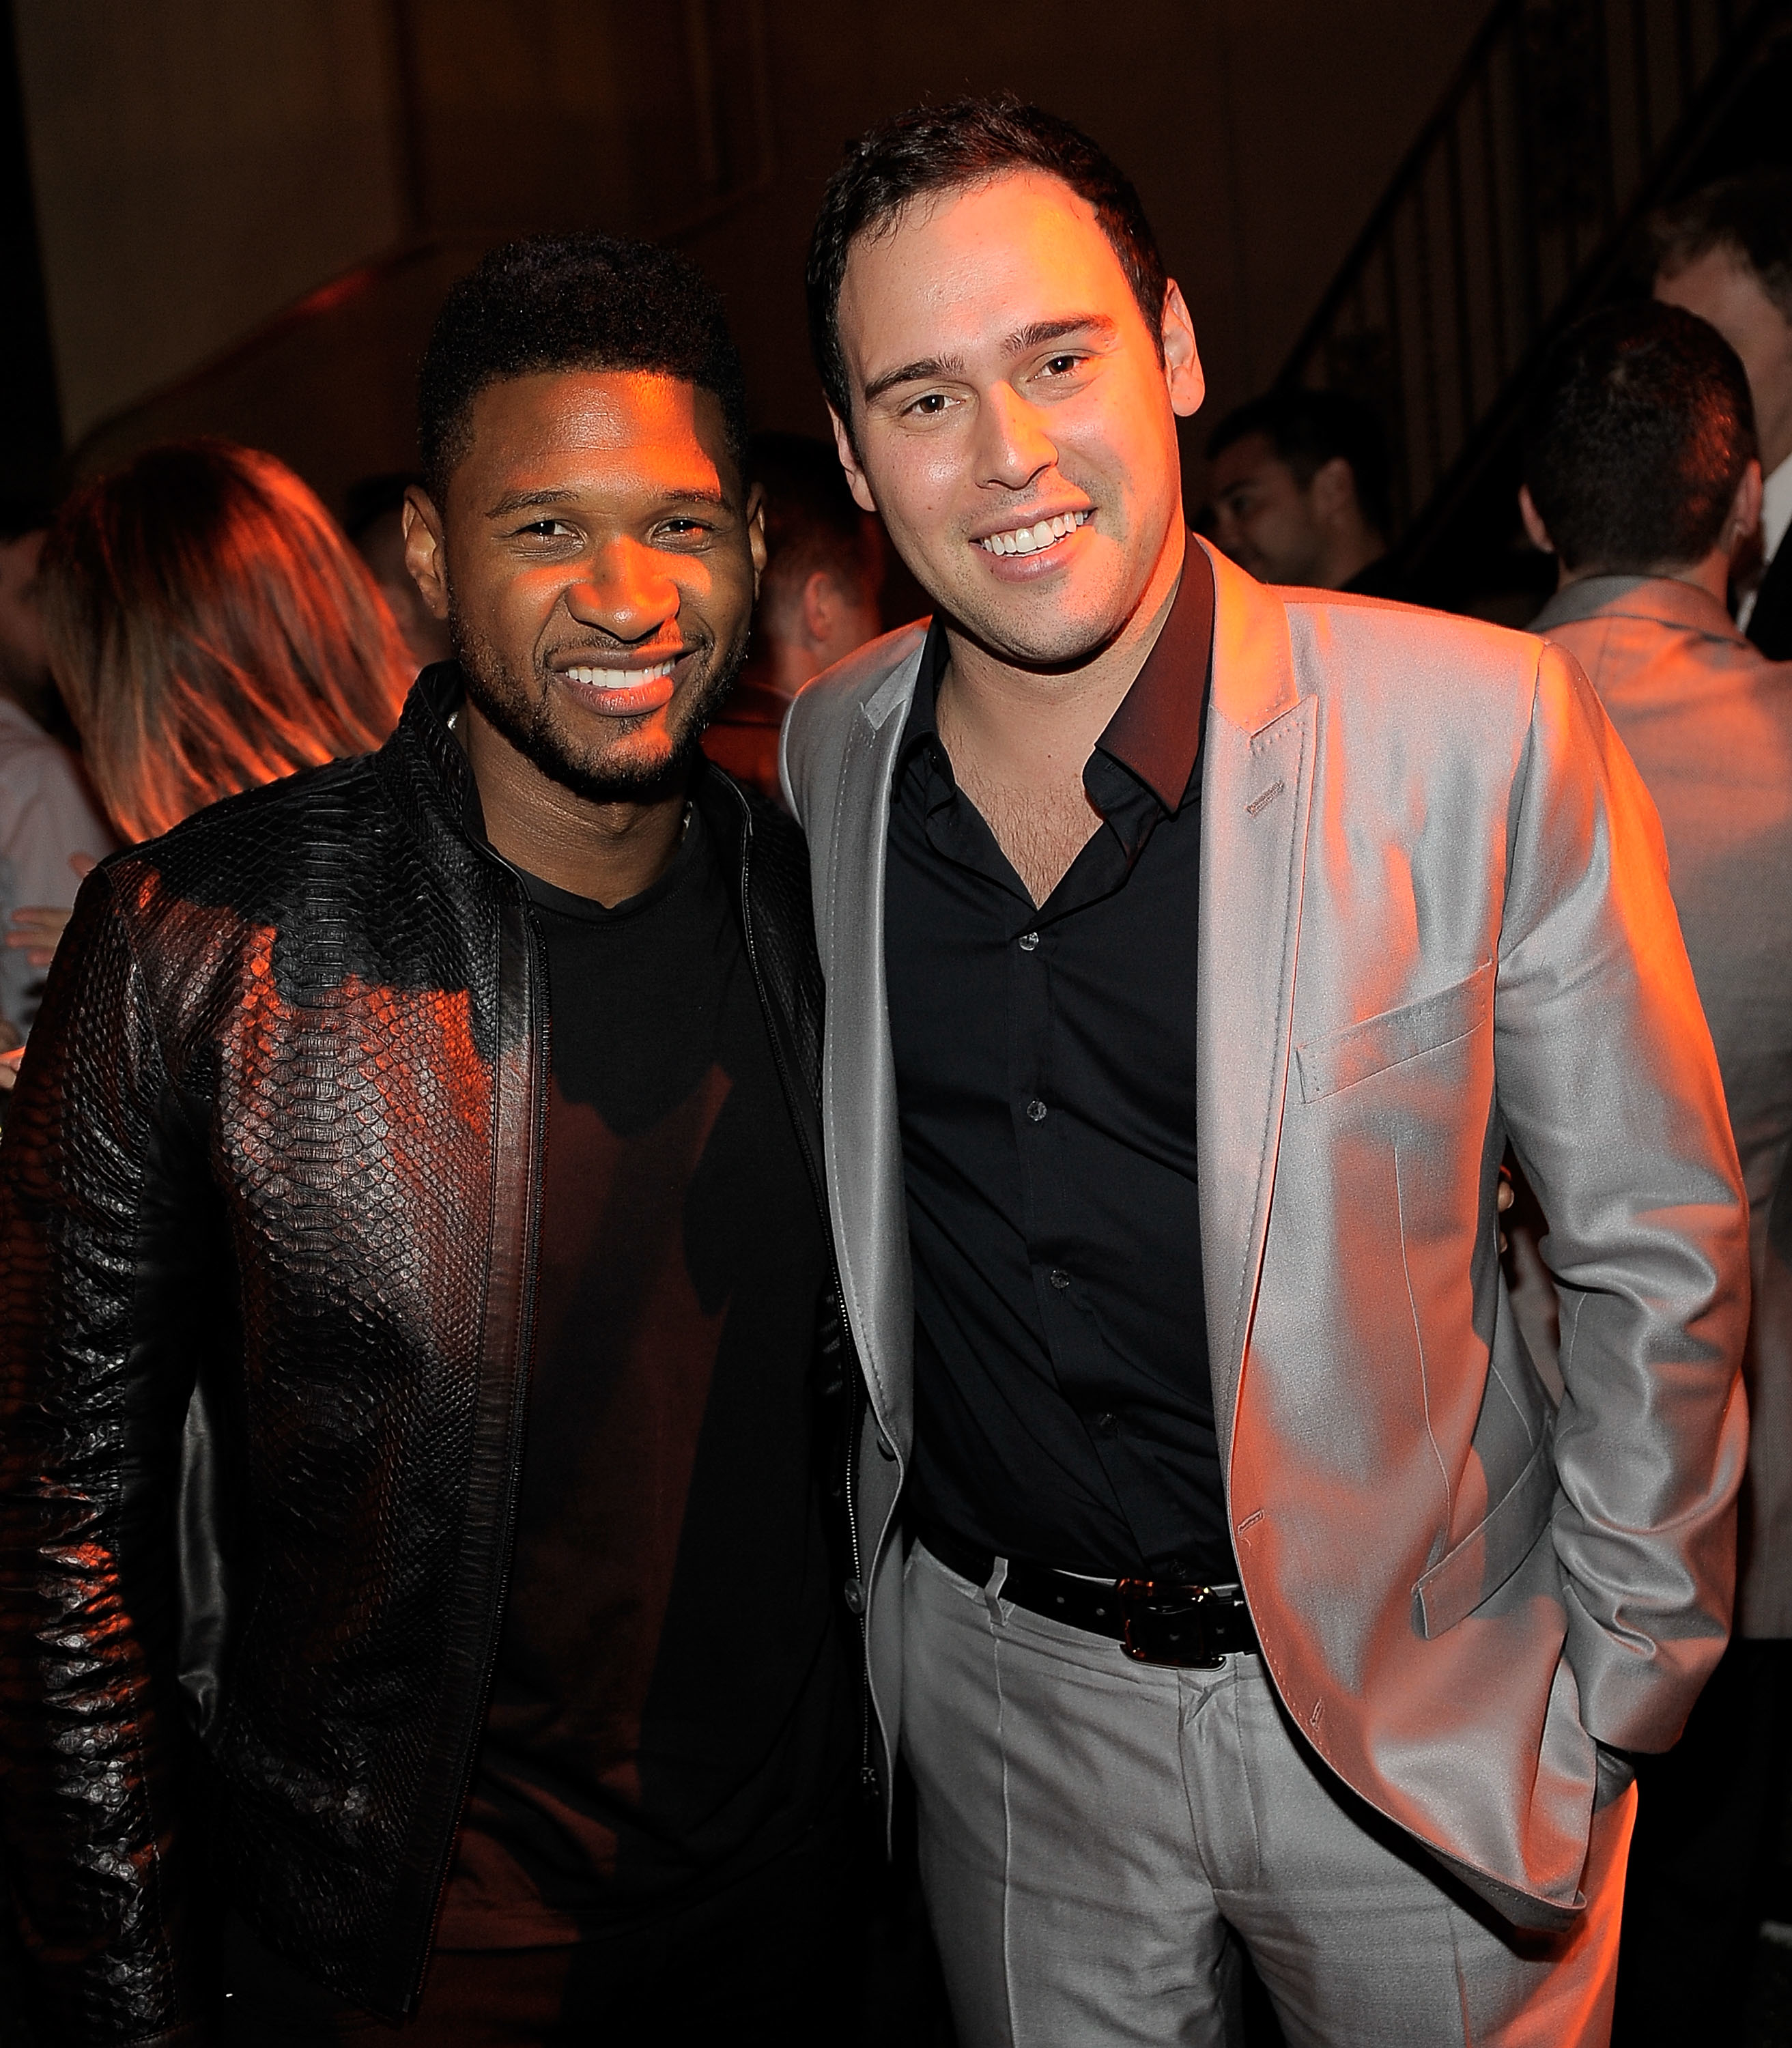 scooter and usher posing together at an event